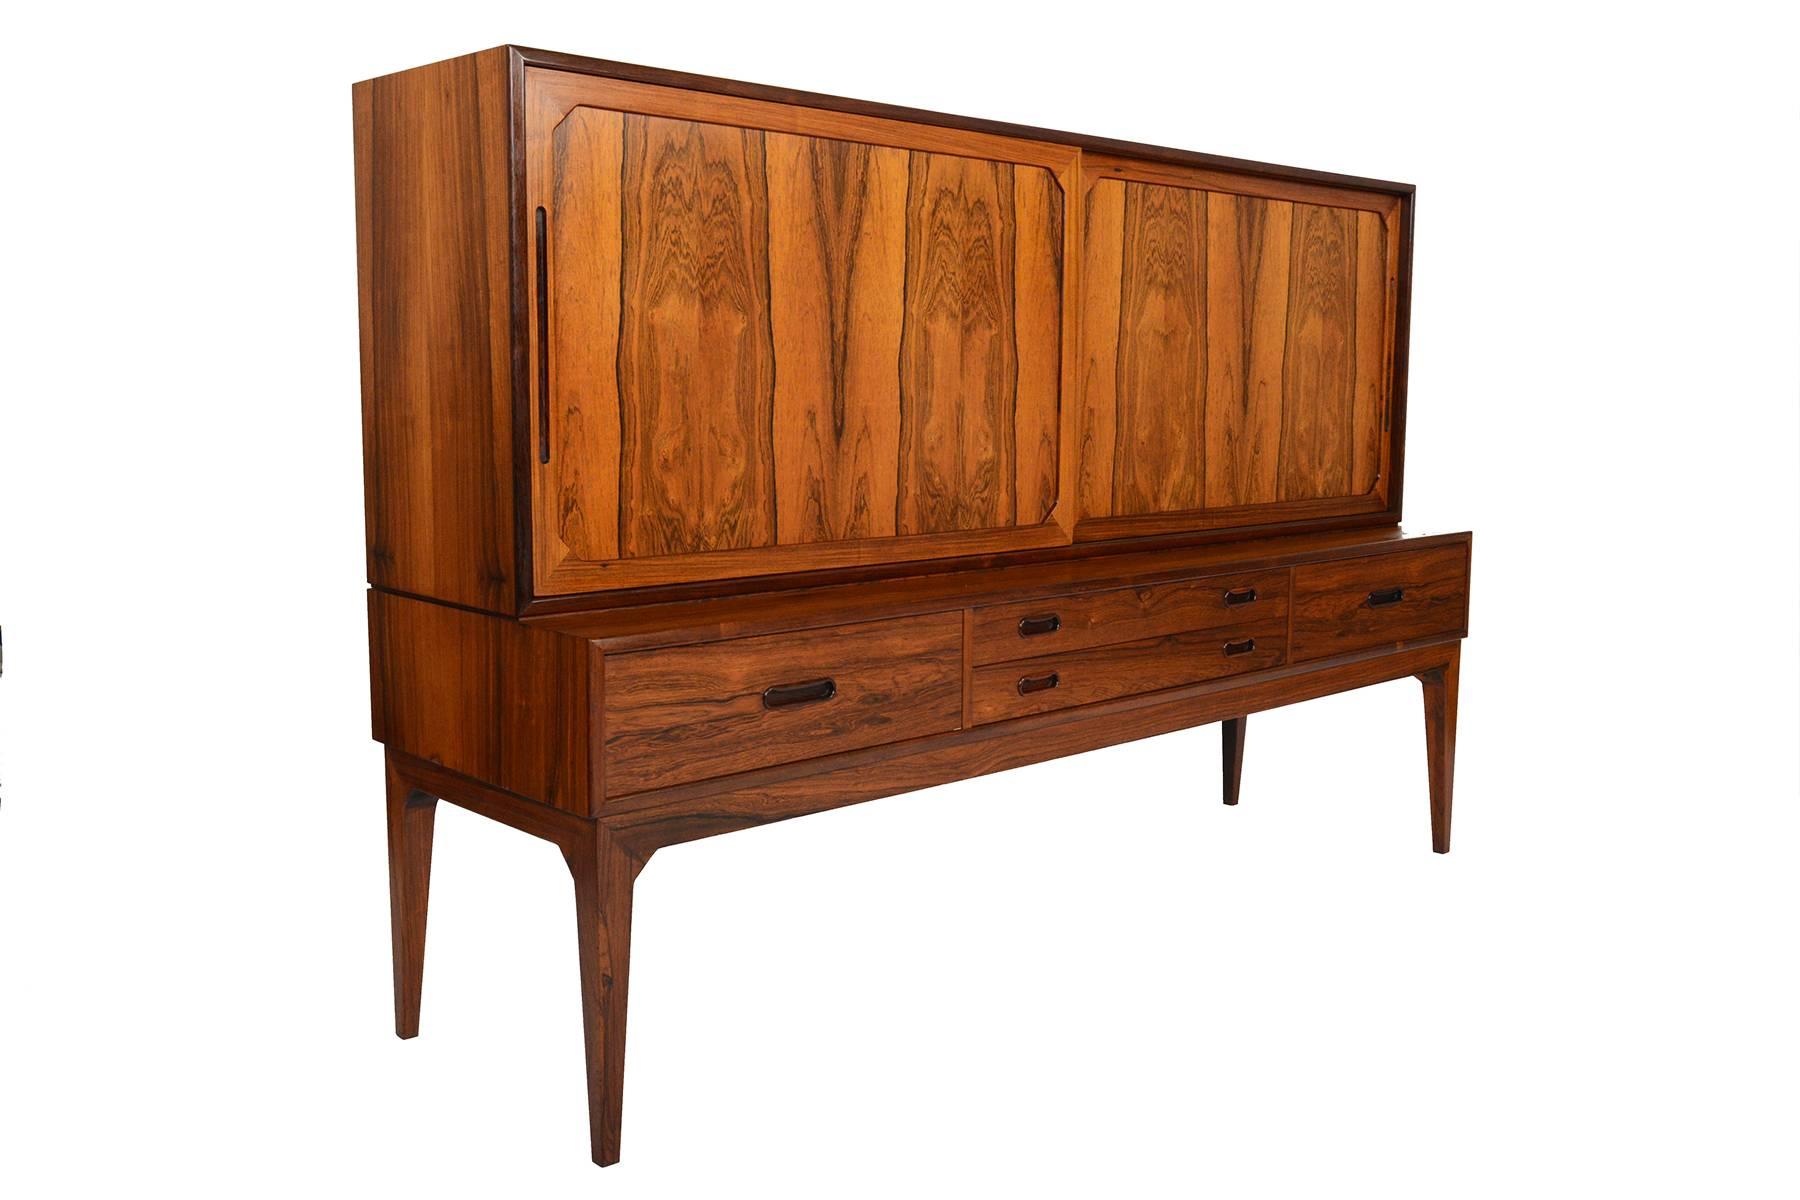 Manufactured by Schou Andersen in the 1960s, this beautiful and unique Danish modern Brazilian rosewood credenza features sculpted framed inlays on each door. Left and right doors open to reveal three bays with a series of adjustable shelves and